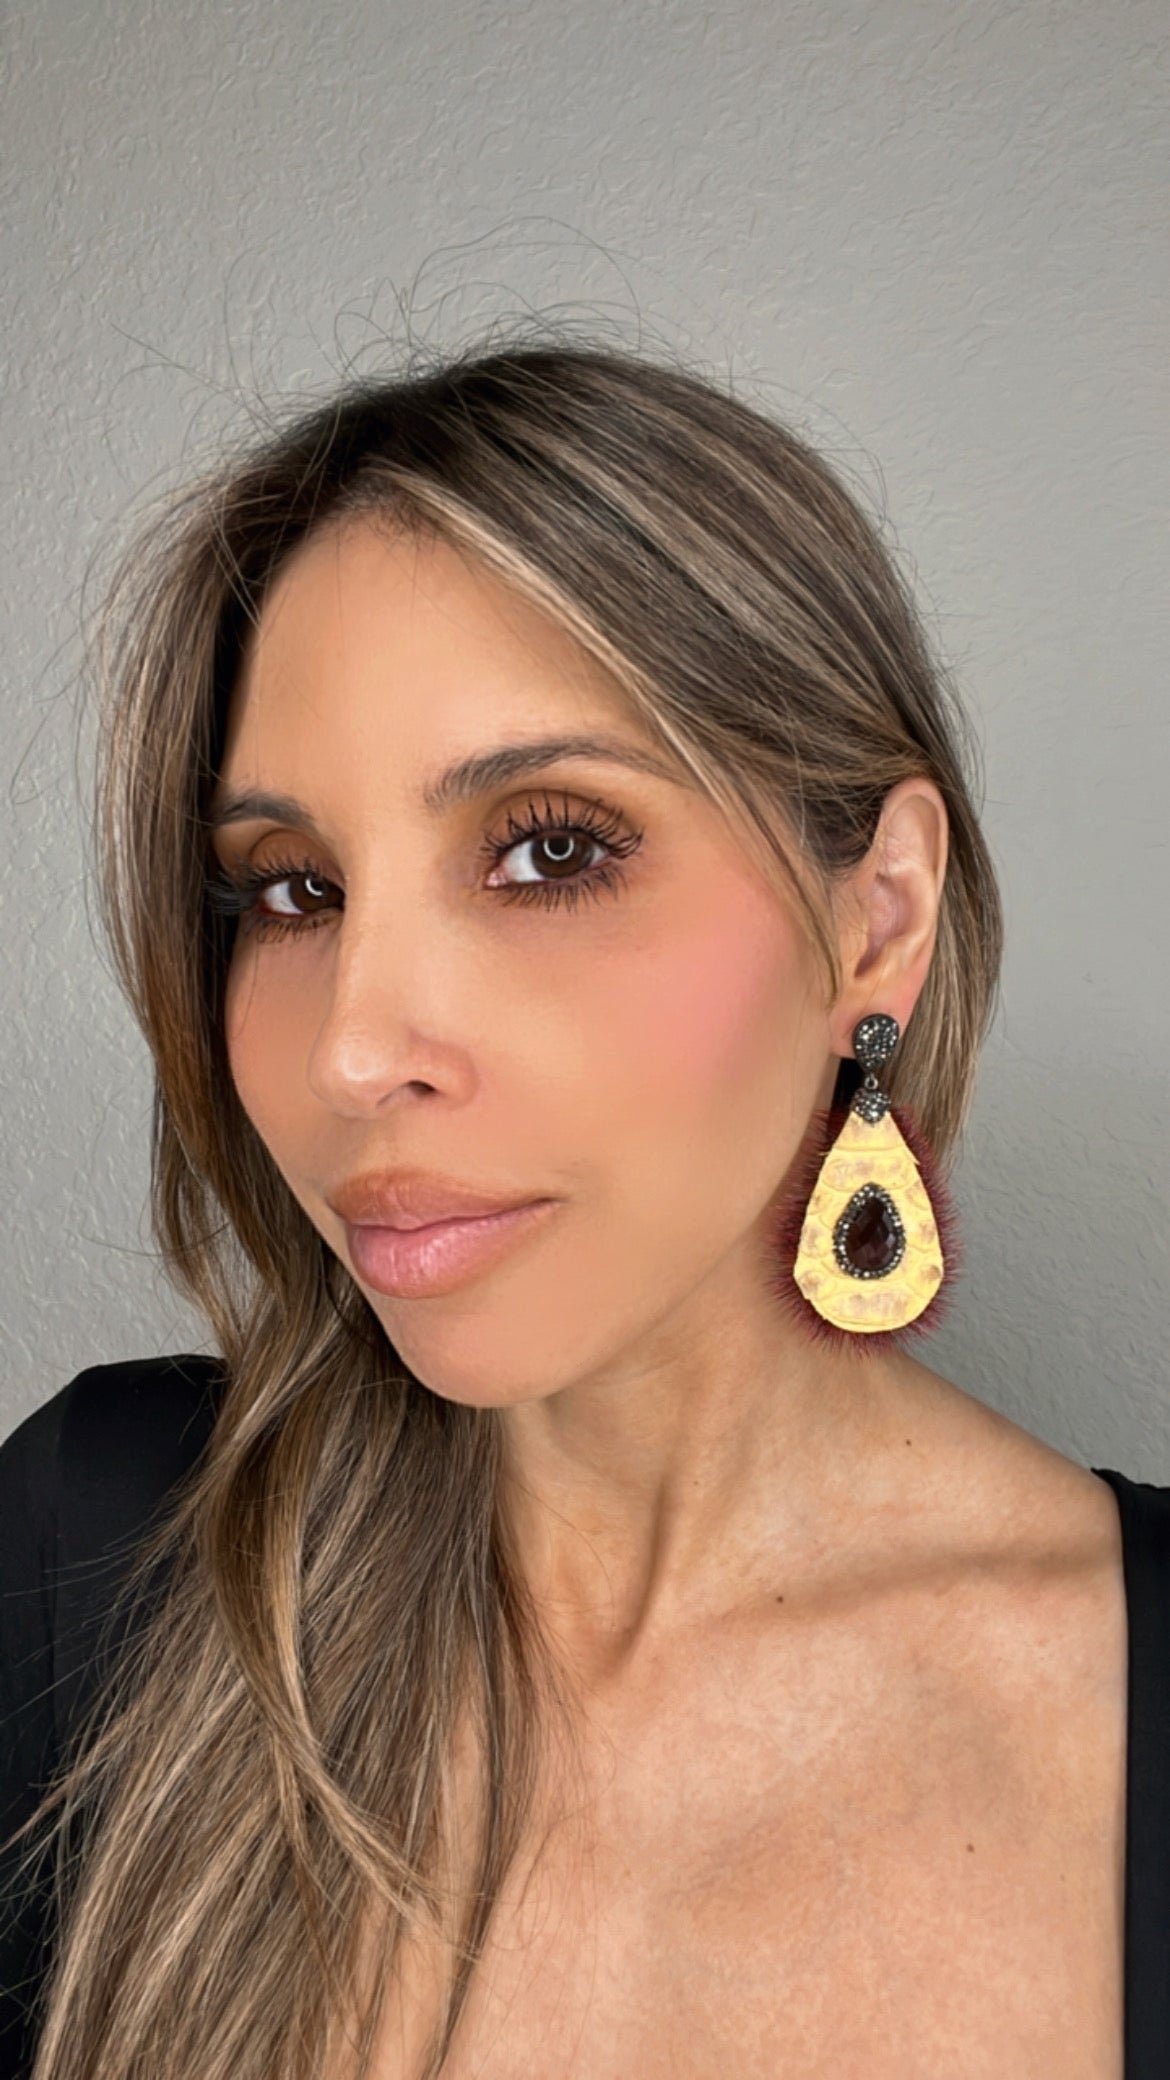 Yellow Leather Snakeskin Earring - Born To Glam